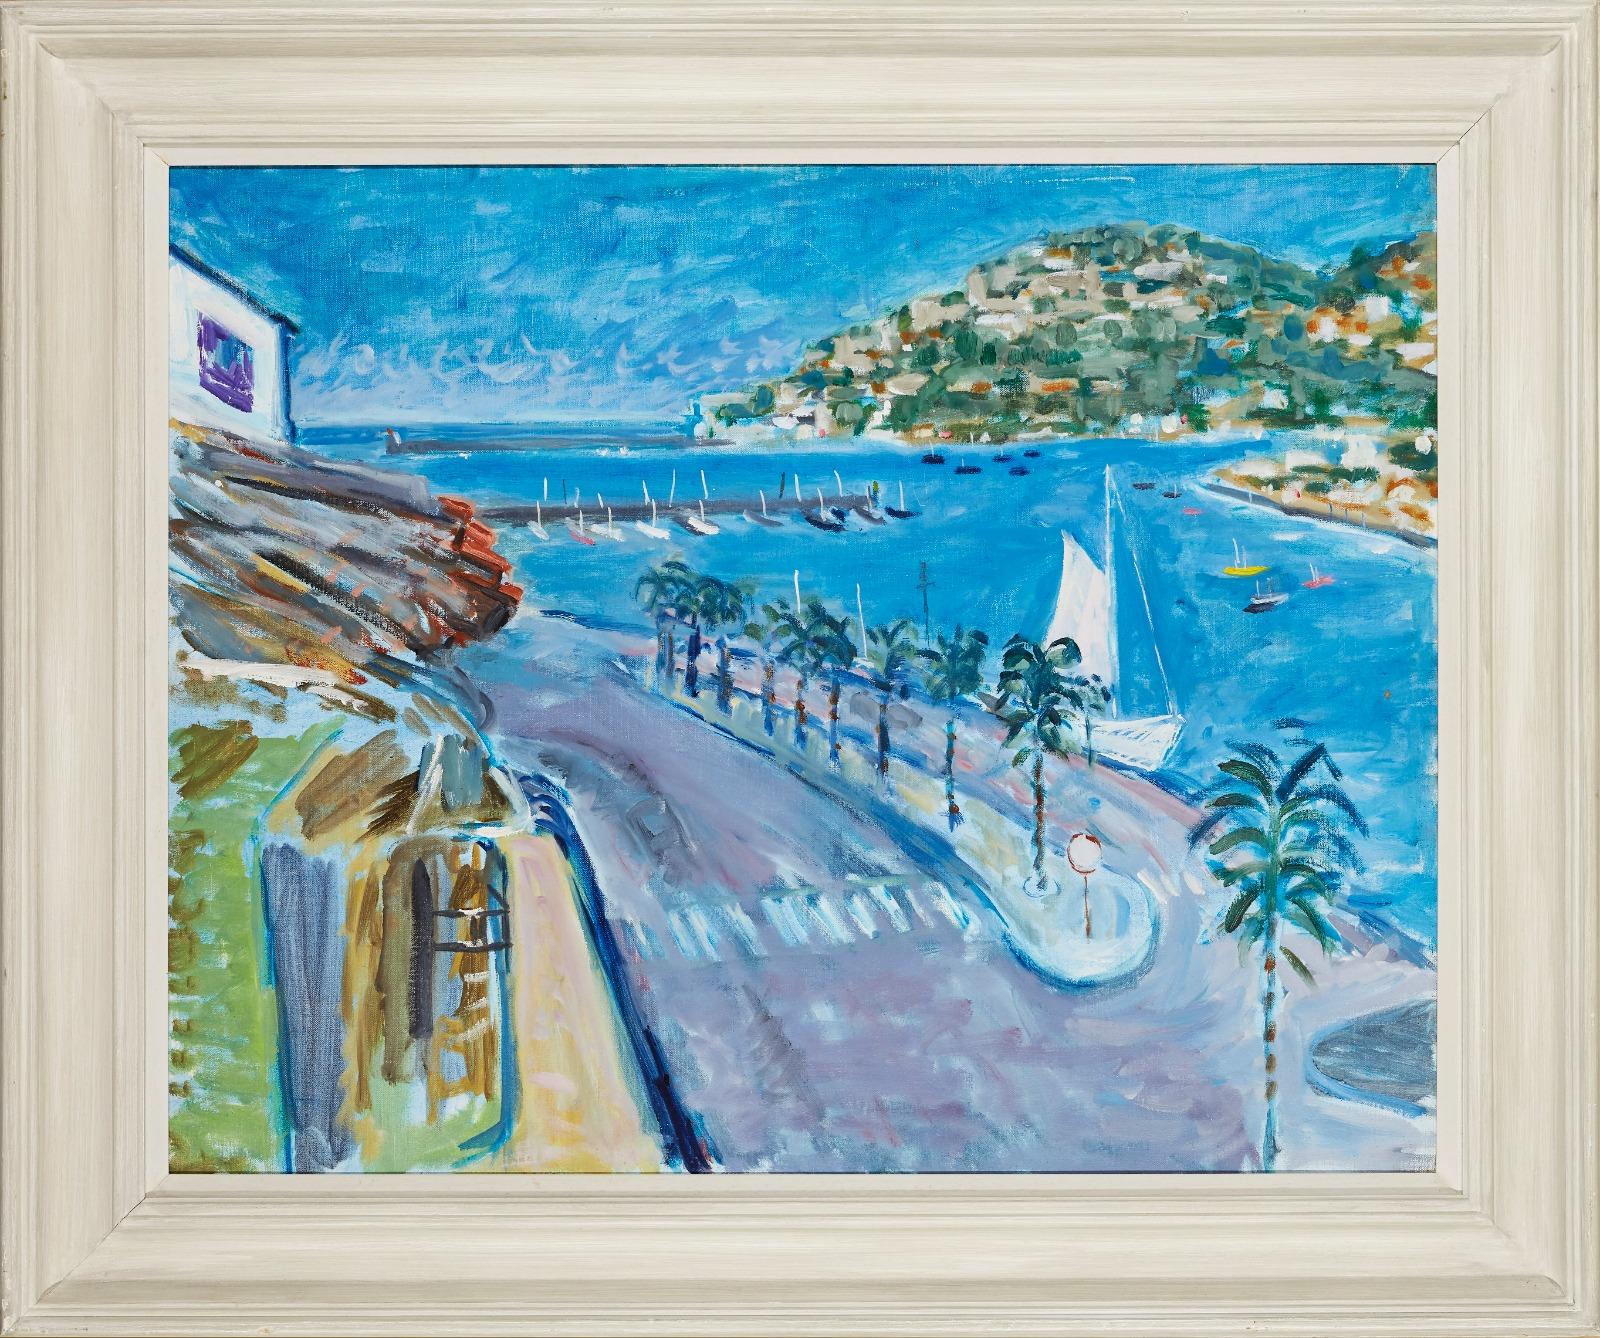 Julian Melgrave, British mid-late 20th century
Harbour Scene, the South of France
oil painting on canvas, framed
signed on stretcher
framed: 30.5 x 36 inches
canvas: 23 x 30 inches
provenance: private collection, UK
condition: very good and sound